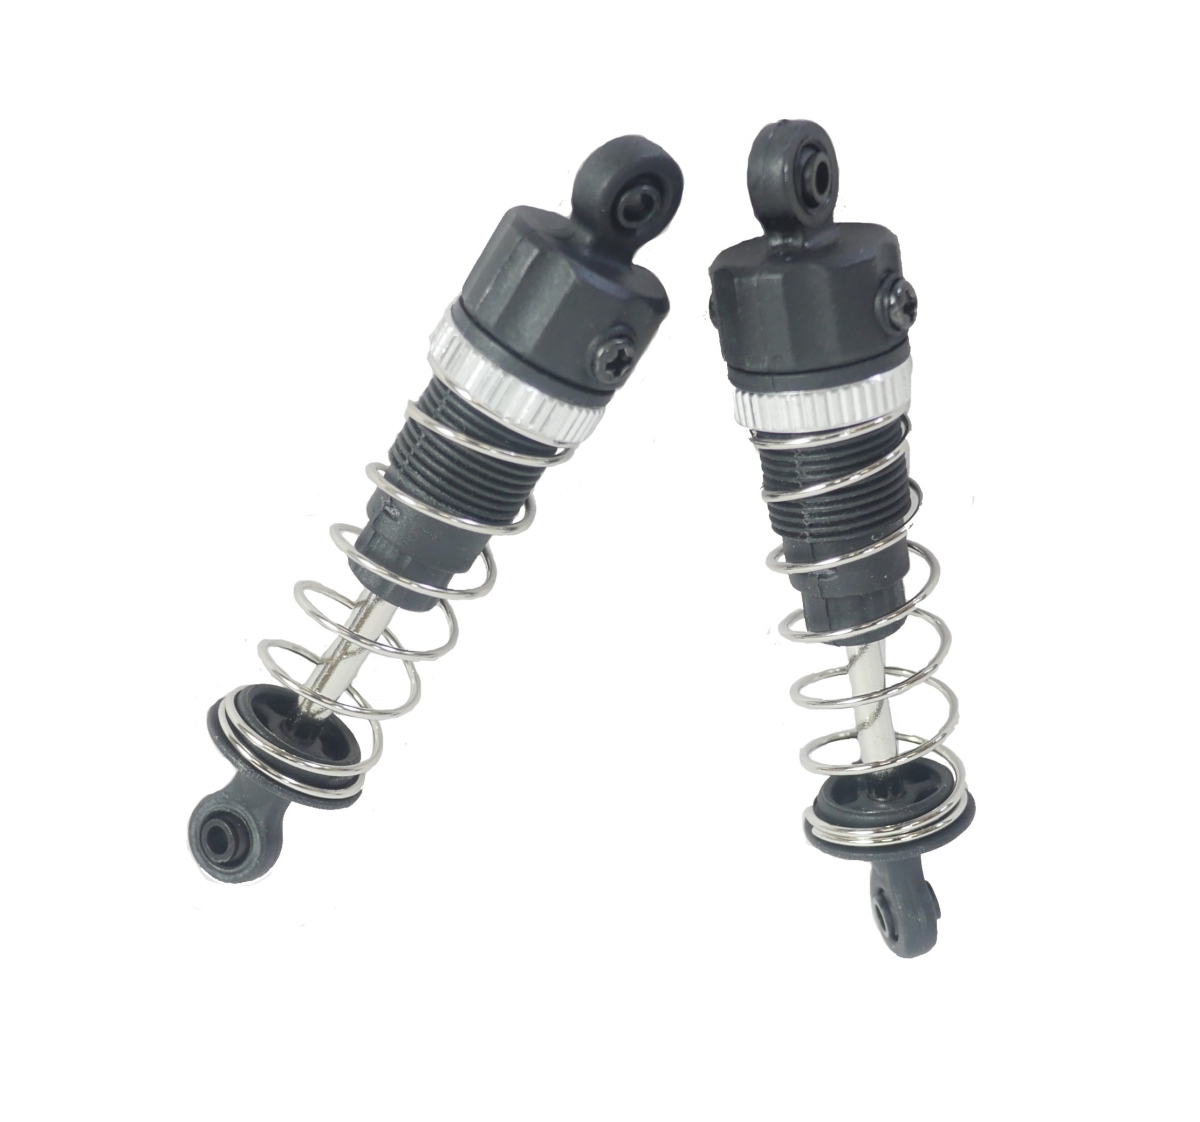 Picture of Black Zon BZN540071 Slyder ST Shock Absorbers - 2 Piece